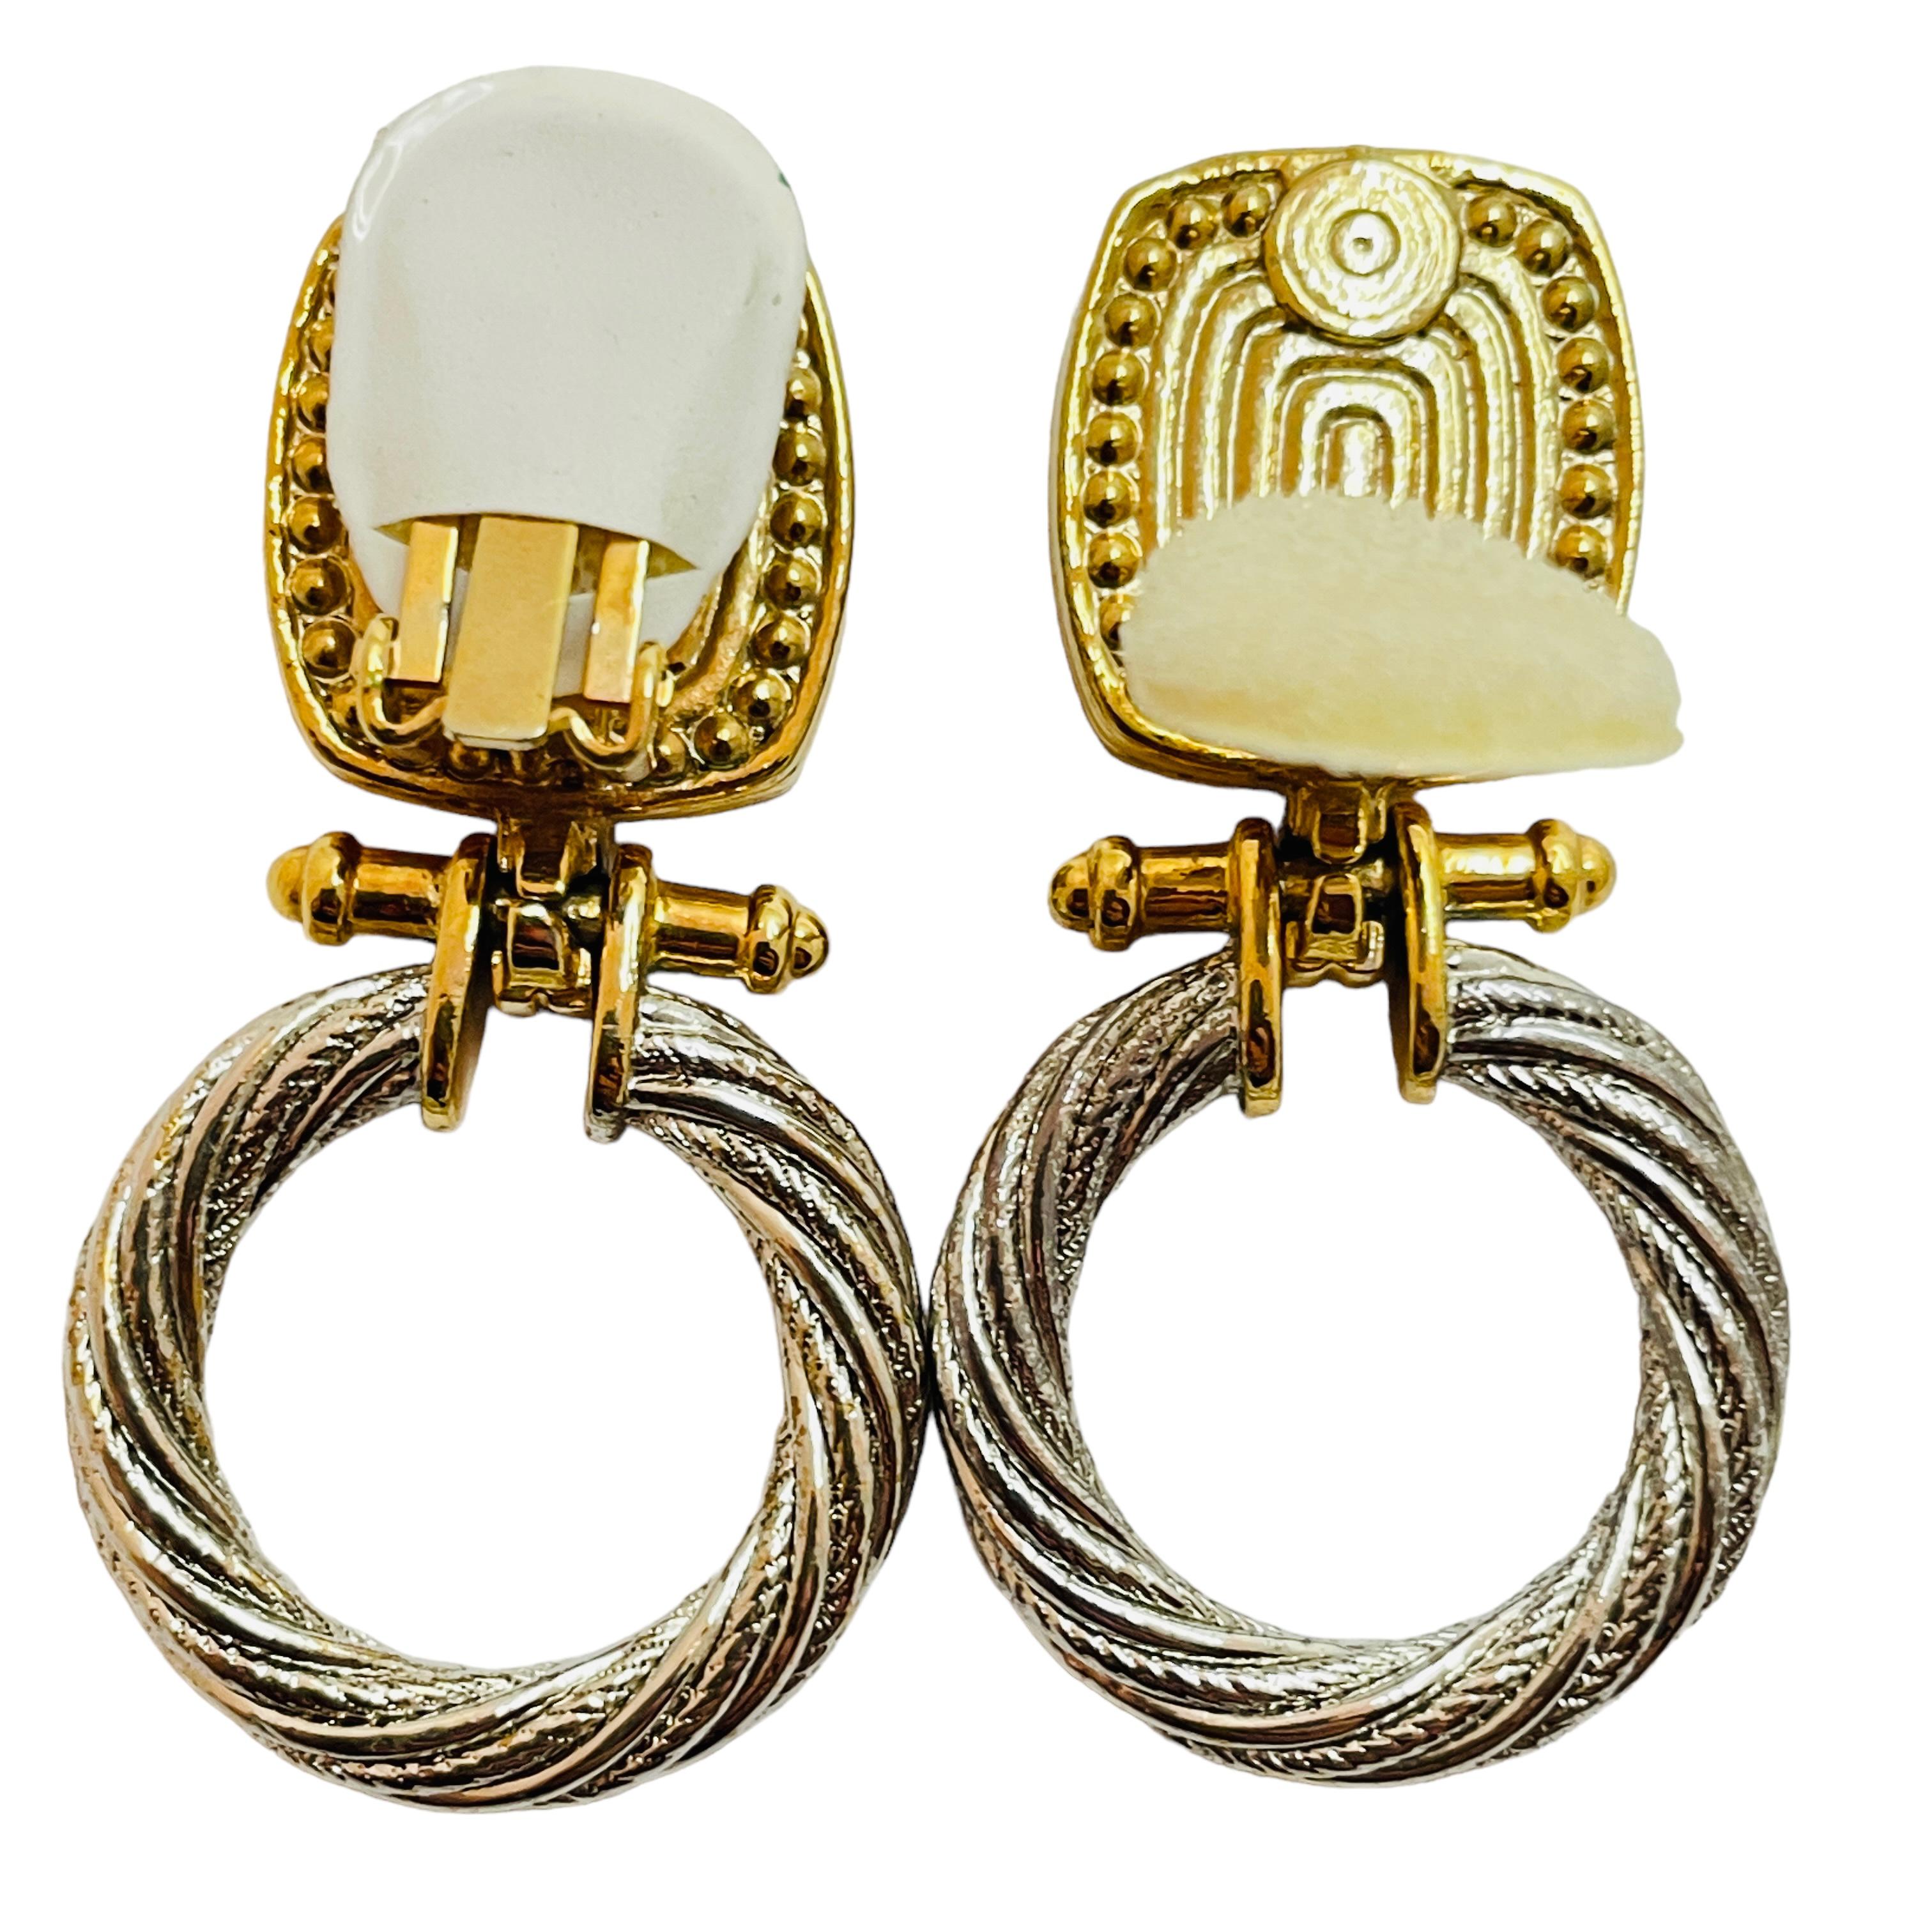 Vintage gold silver nautical door knocker clip on designer earrings In Excellent Condition For Sale In Palos Hills, IL